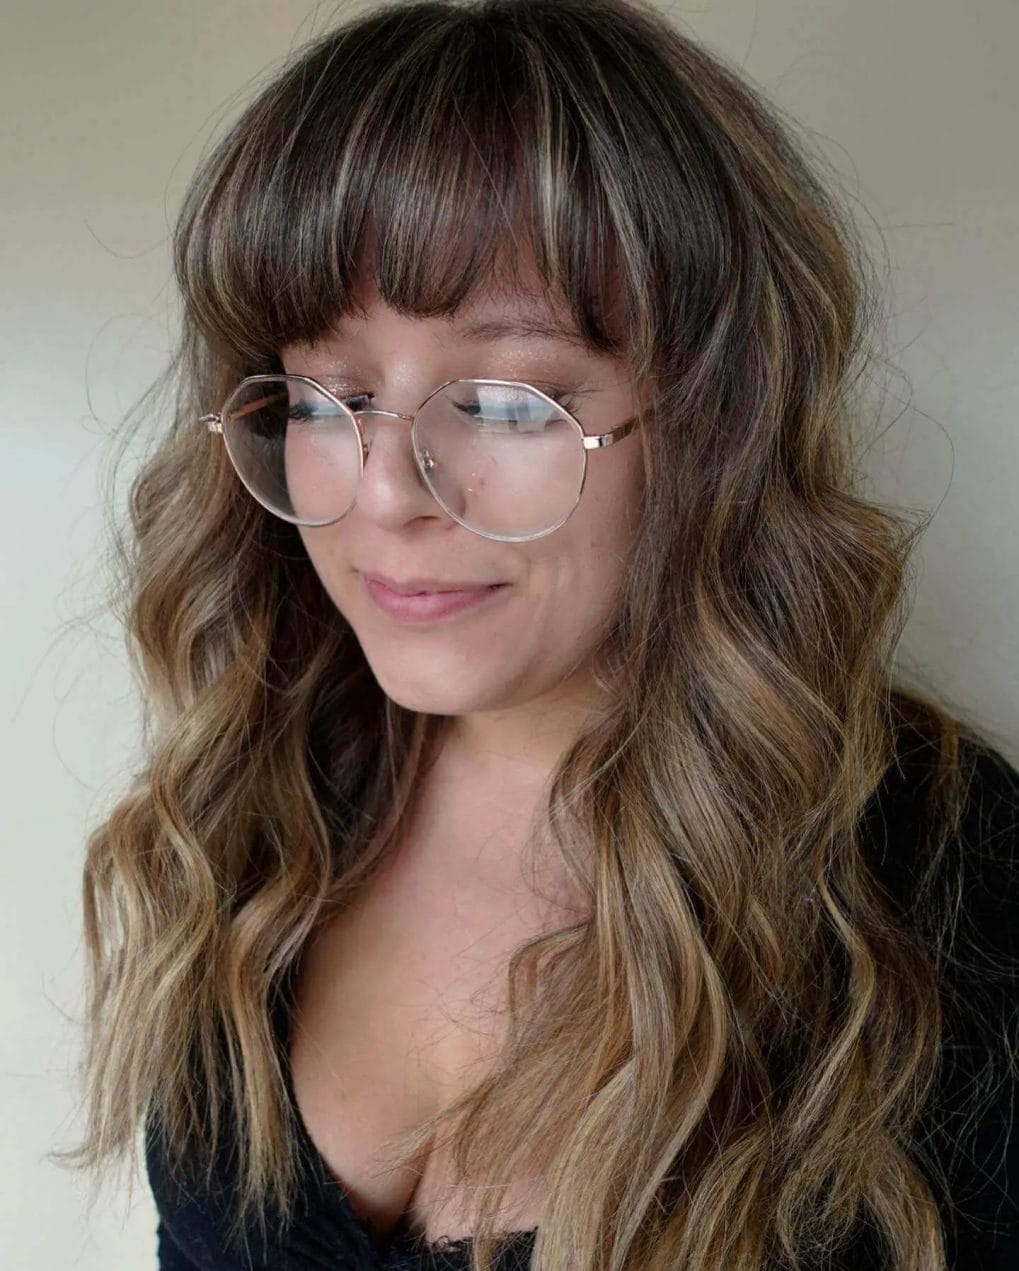 Sun-kissed highlights in chic wavy hair with full, straight fringe and round spectacles.